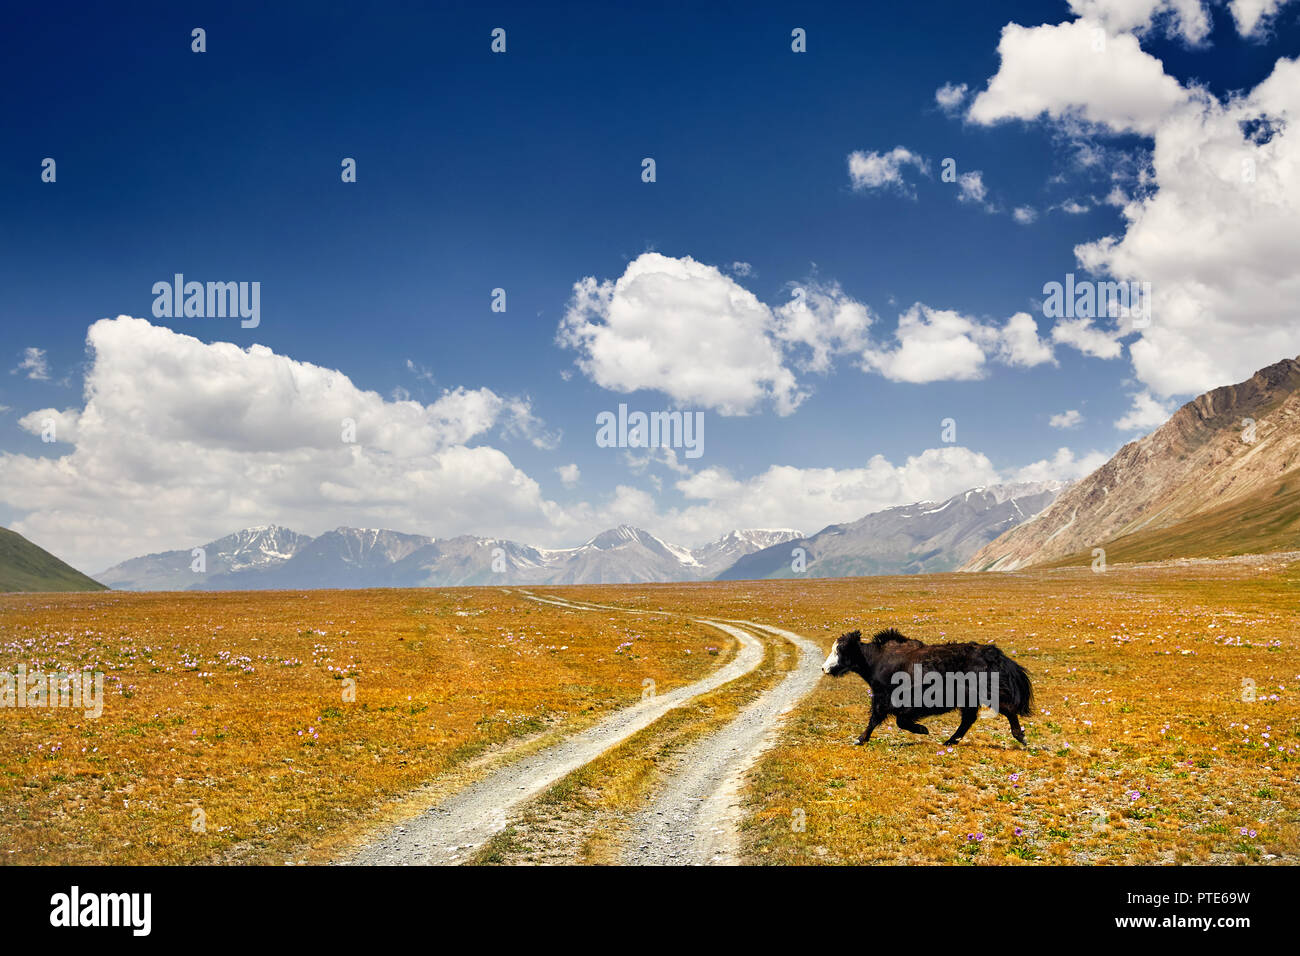 Black Yak crossing the road in the mountain valley of Kyrgyzstan, Central Asia Stock Photo